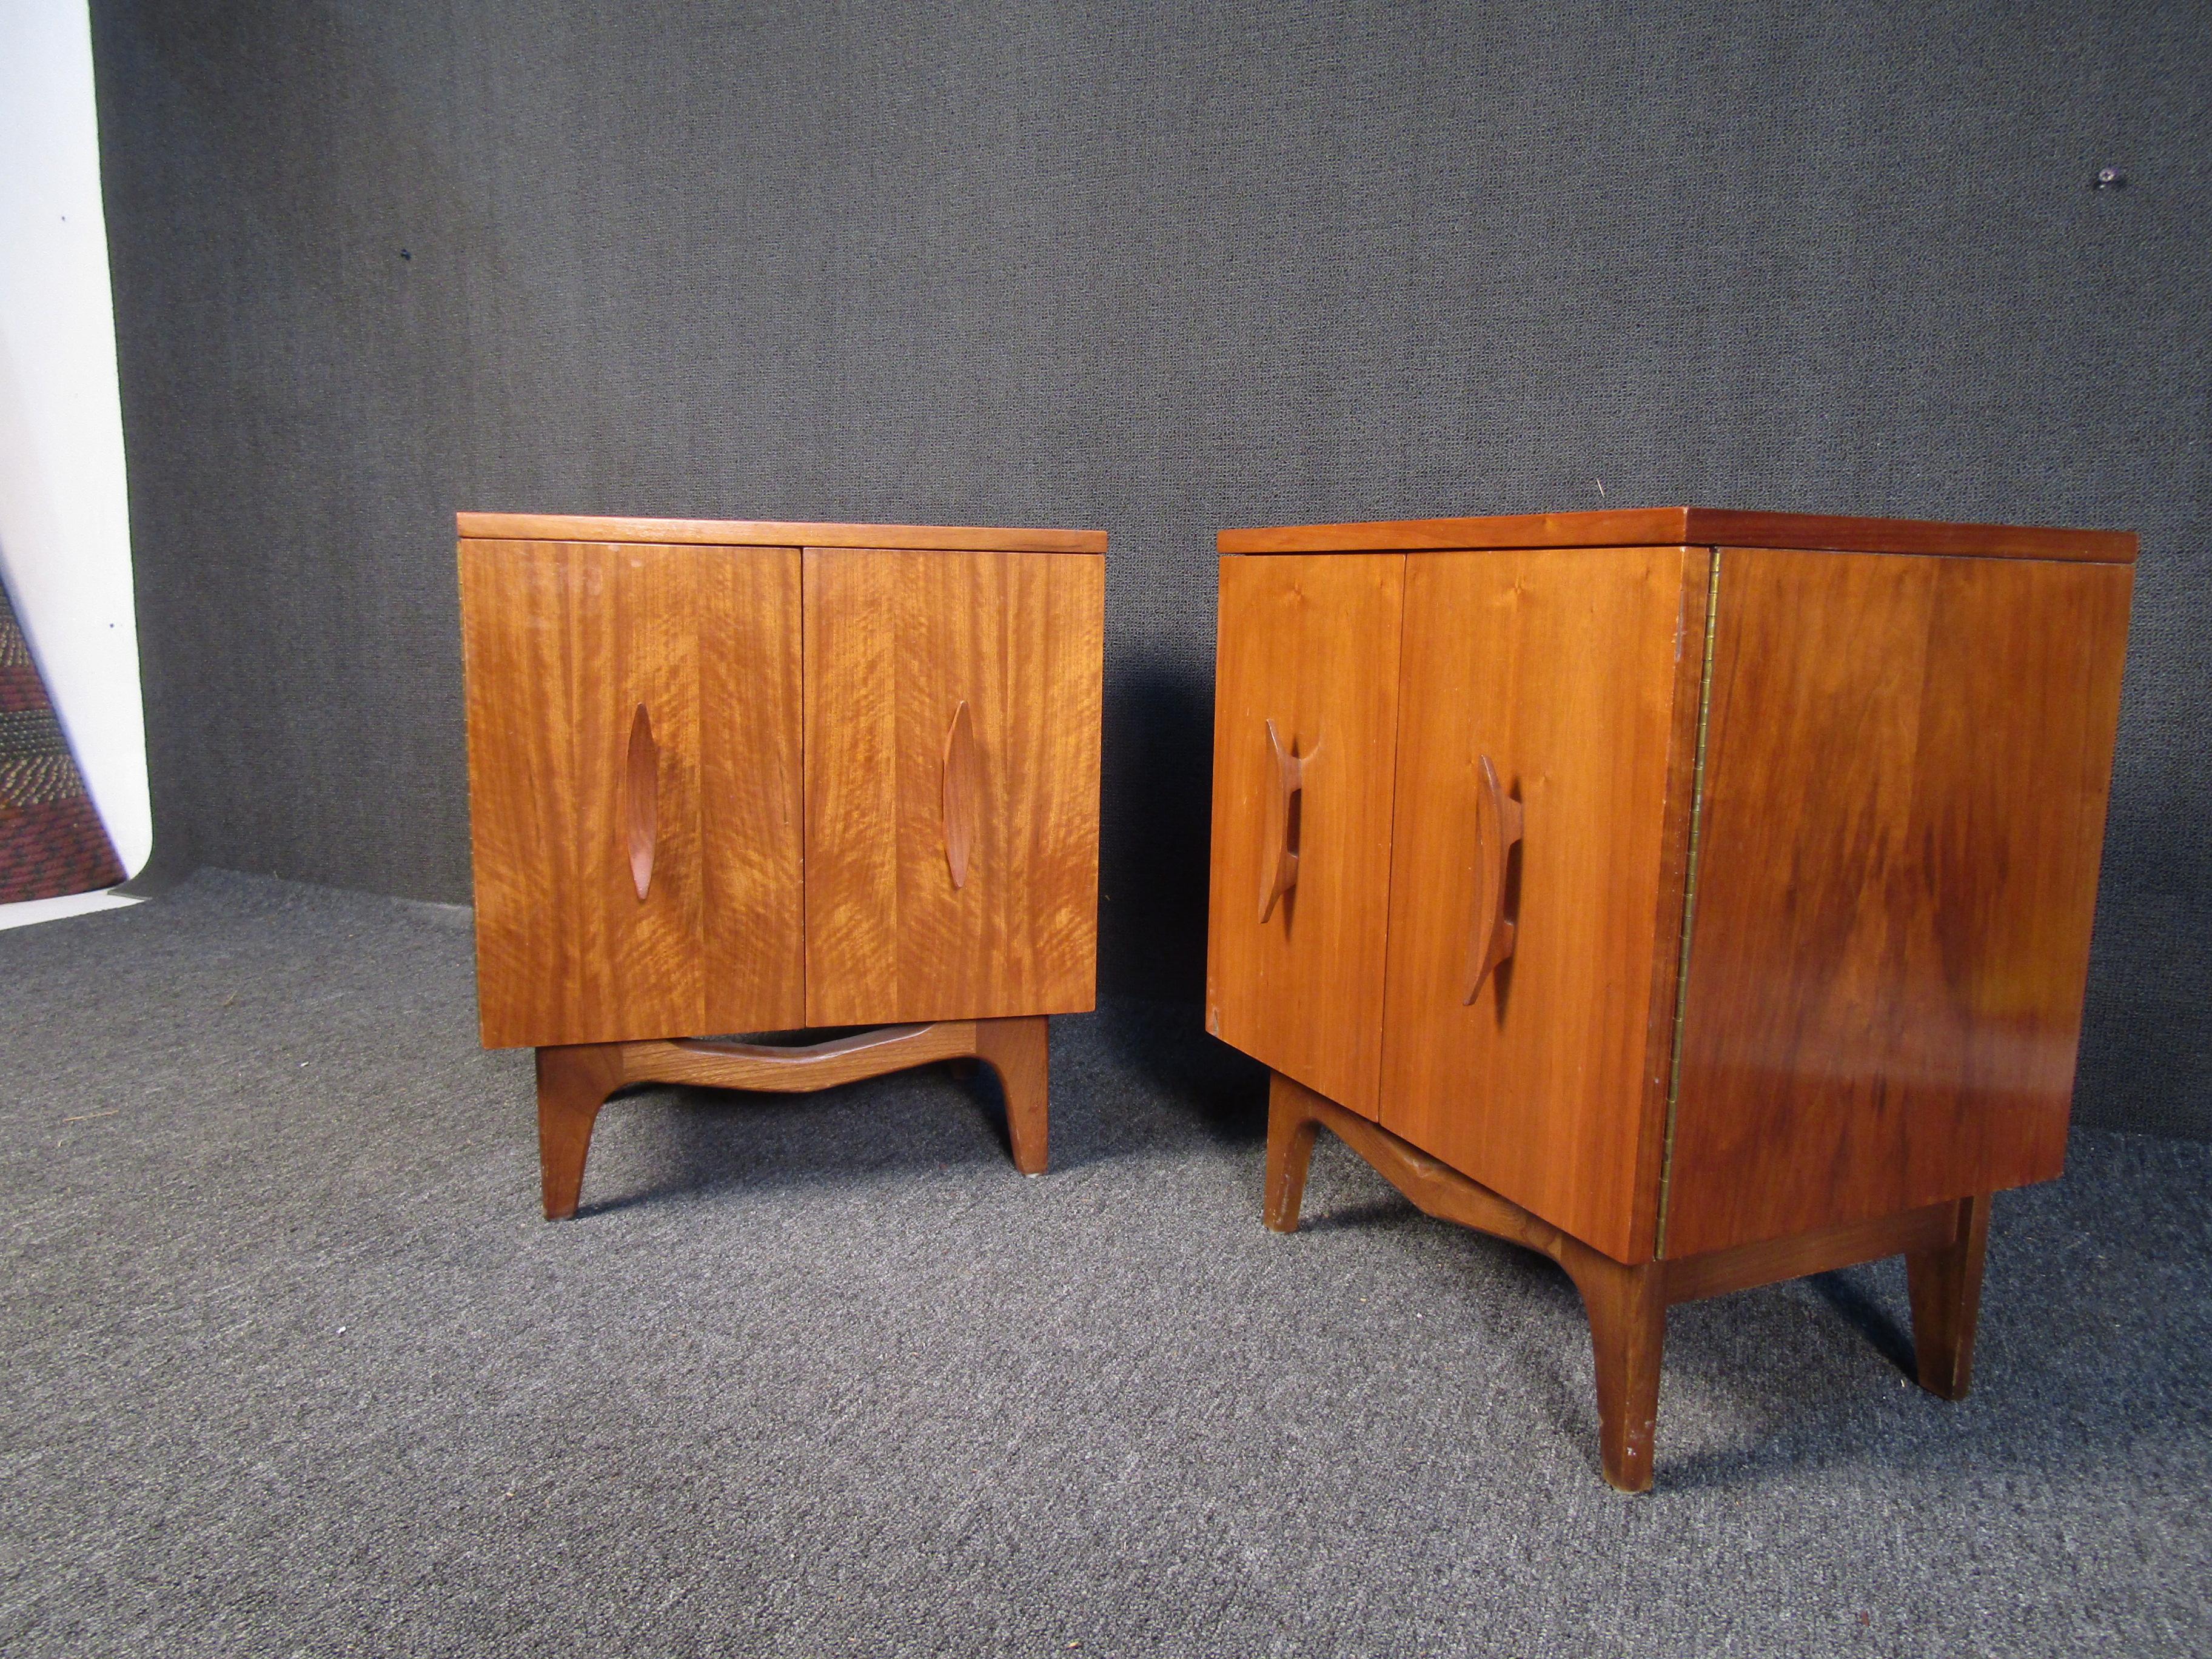 This pair of Mid-Century Modern nightstands feature a beautiful walnut woodgrain, simple and elegant design, and unique sculpted handles. With large interior compartments, these nightstands allow for ample storage while bringing Mid-Century Modern